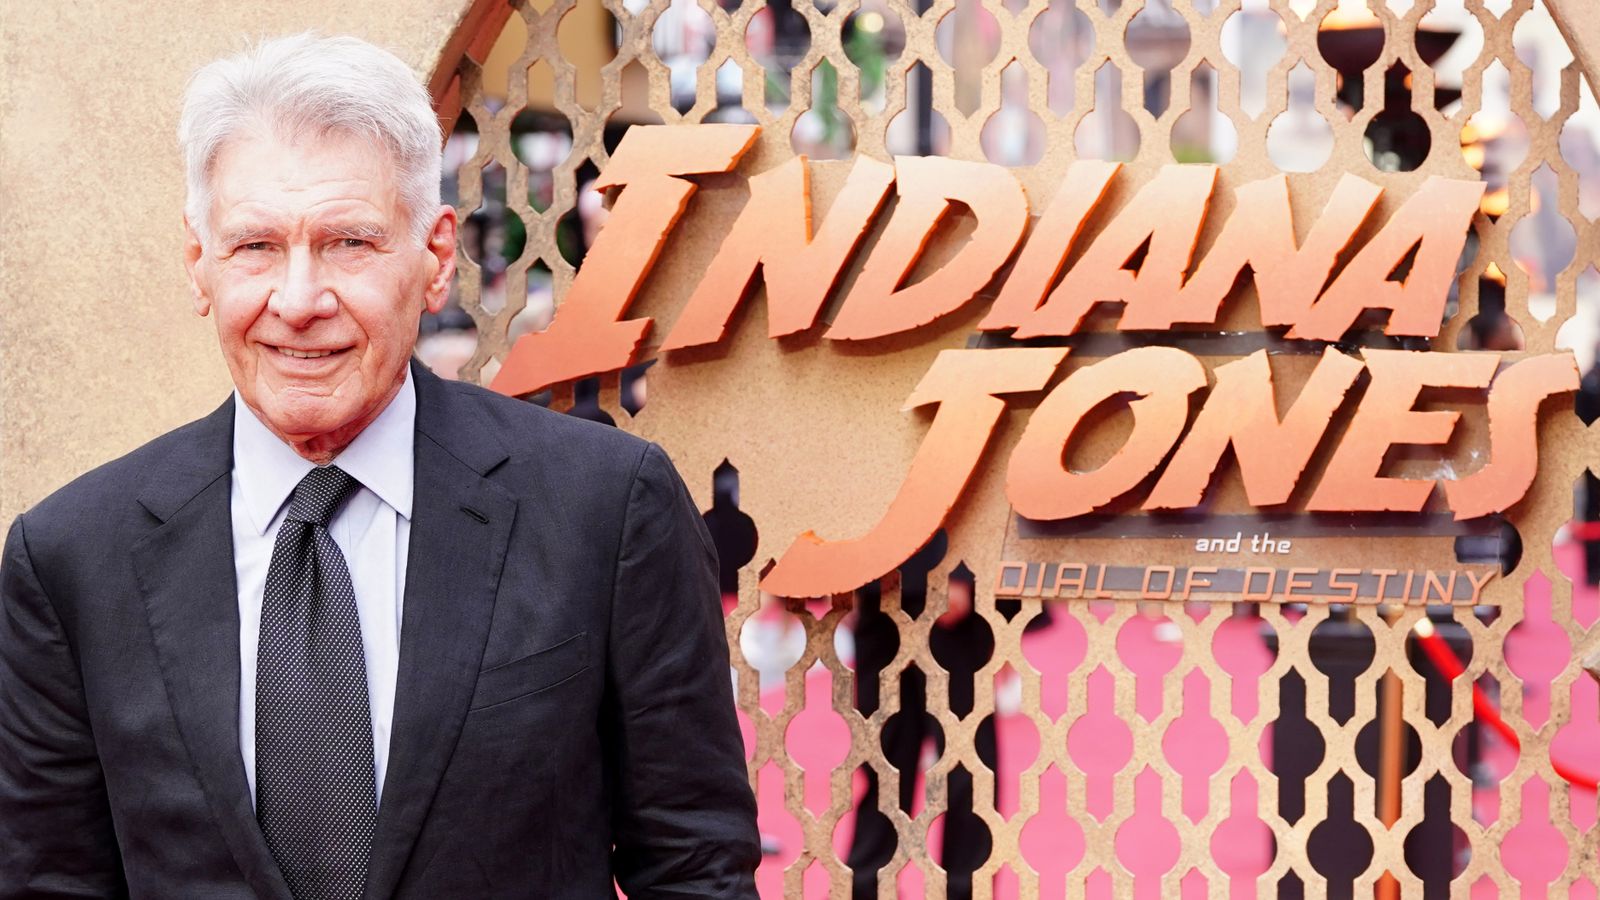 Harrison Ford on playing Indiana Jones for four decades: 'It's kind of silly'